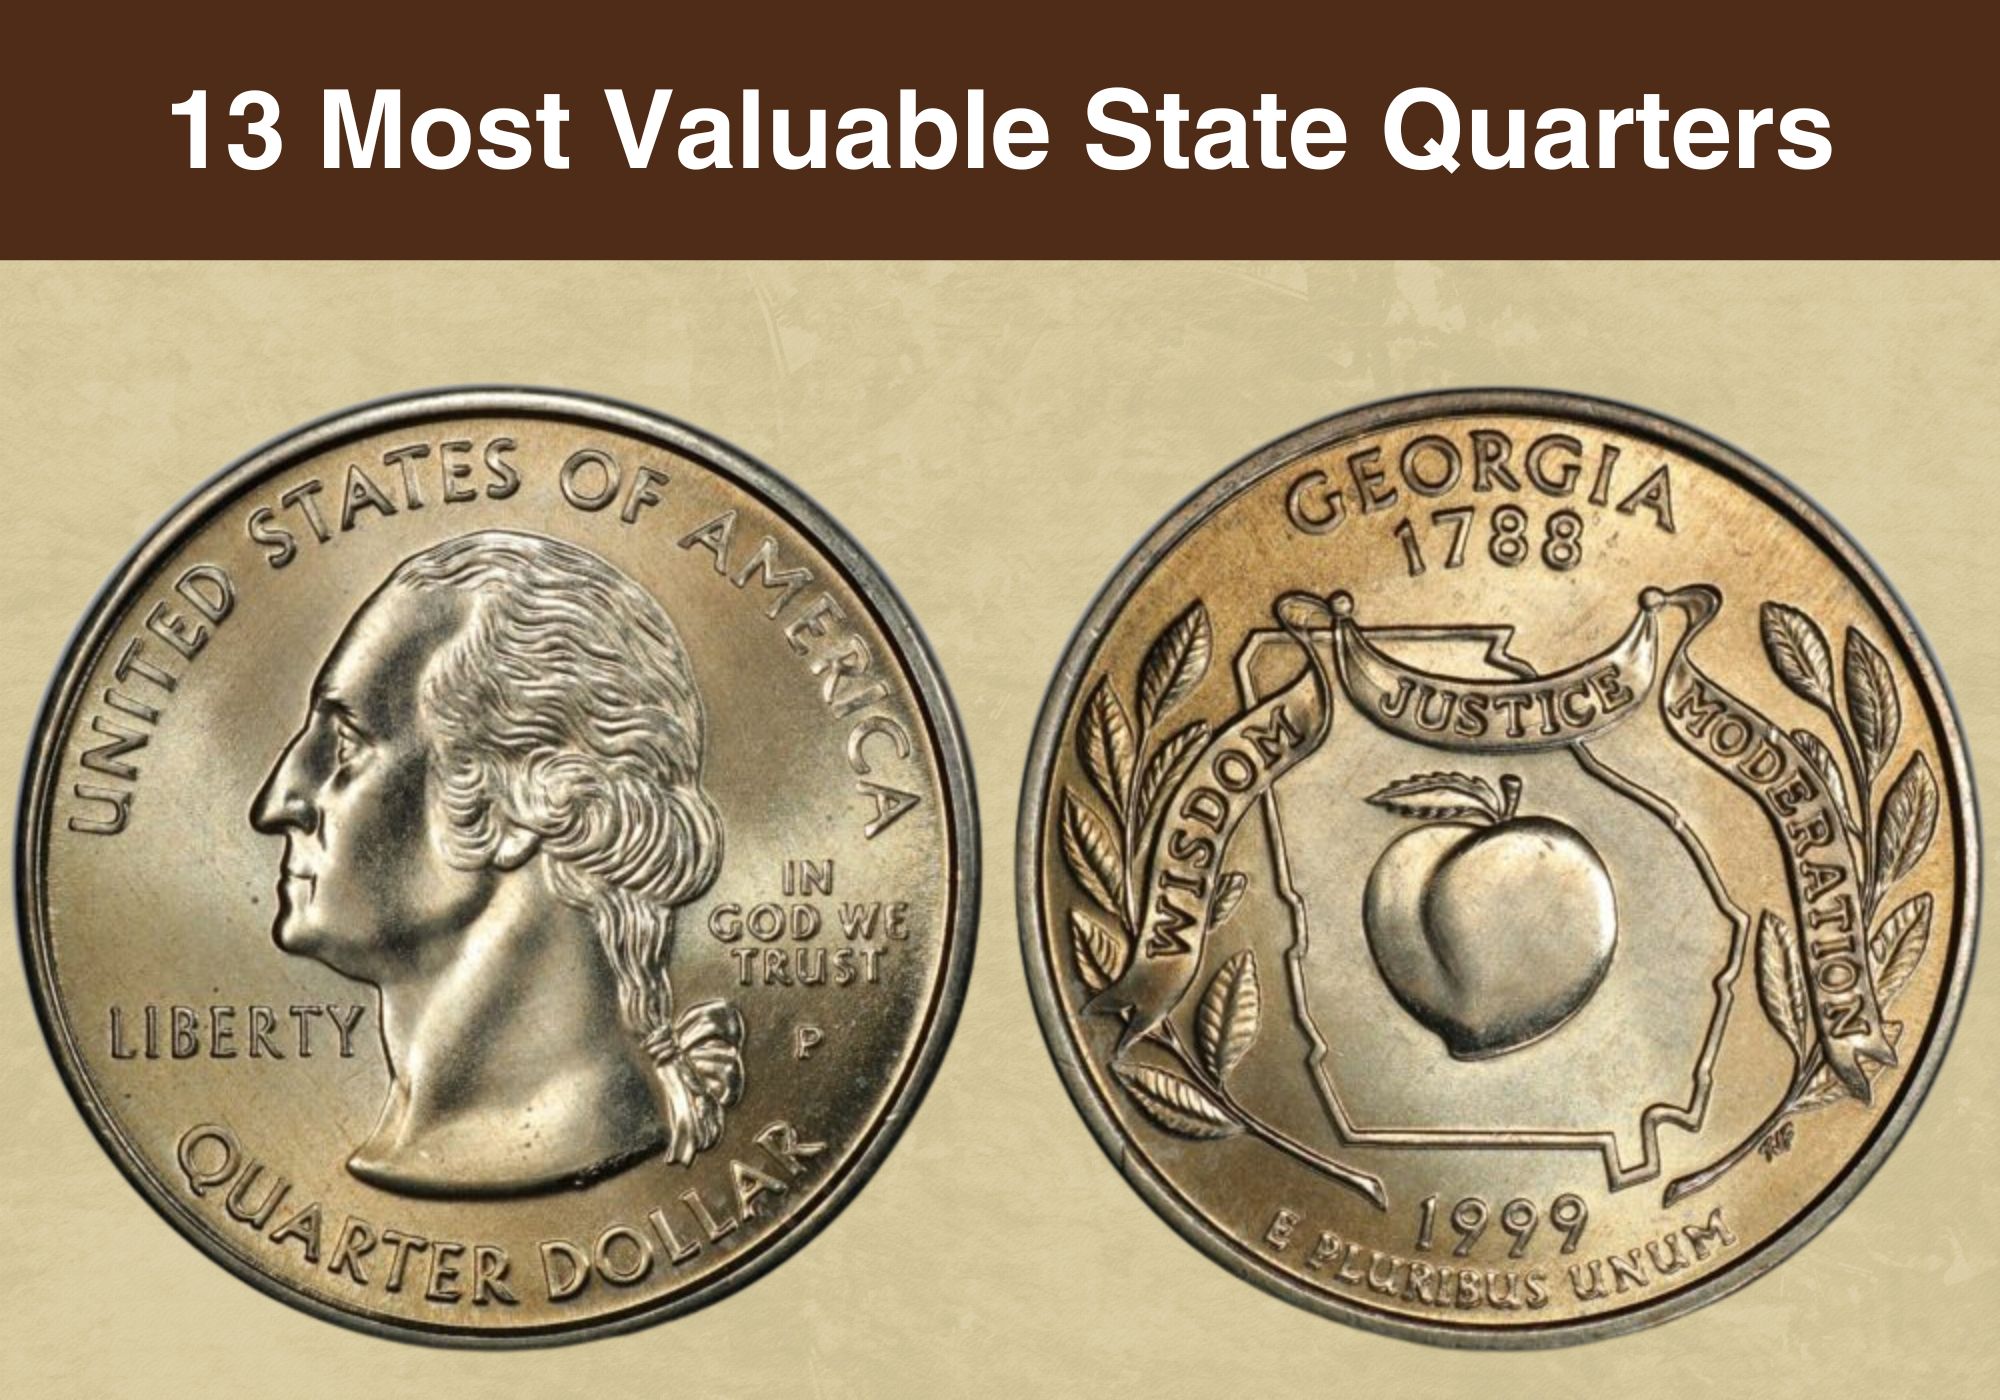 13 Most Valuable State Quarters